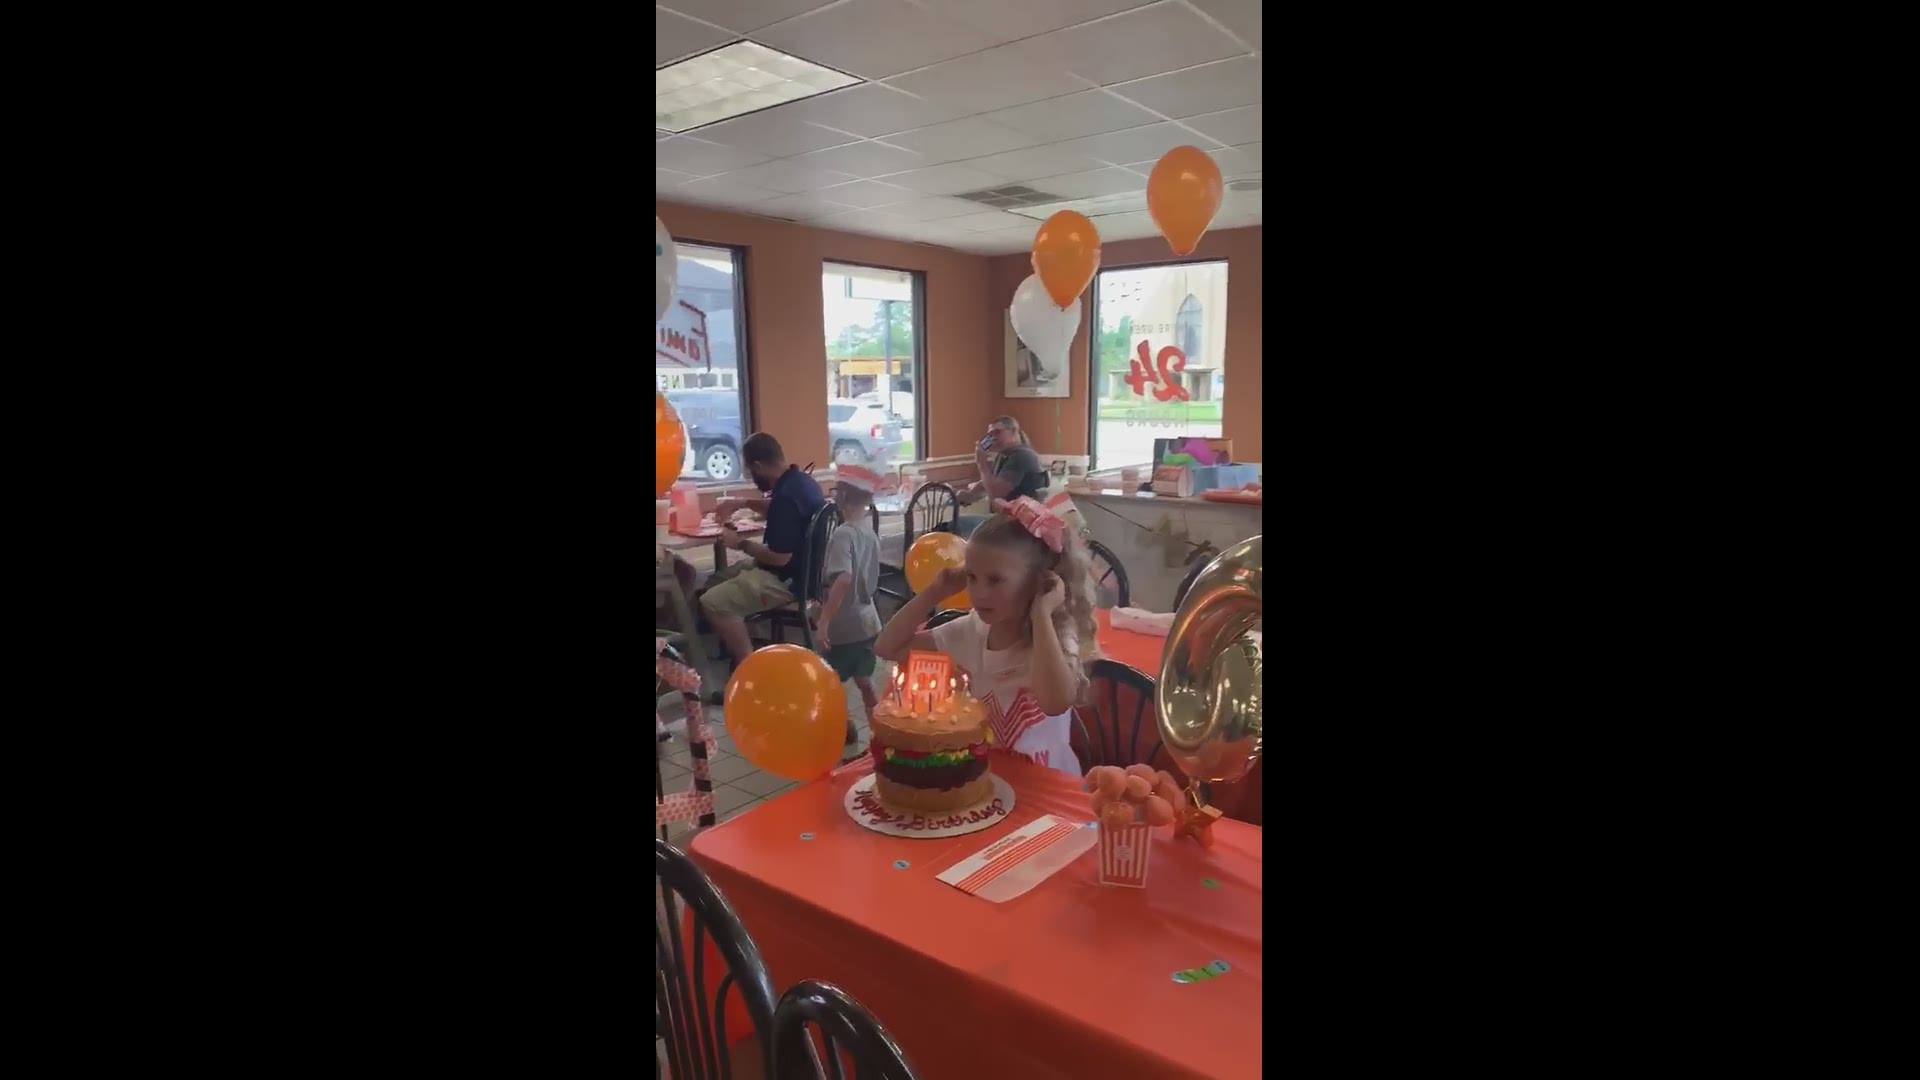 It's a sweet celebration for 6-year-old Becca Schroeder